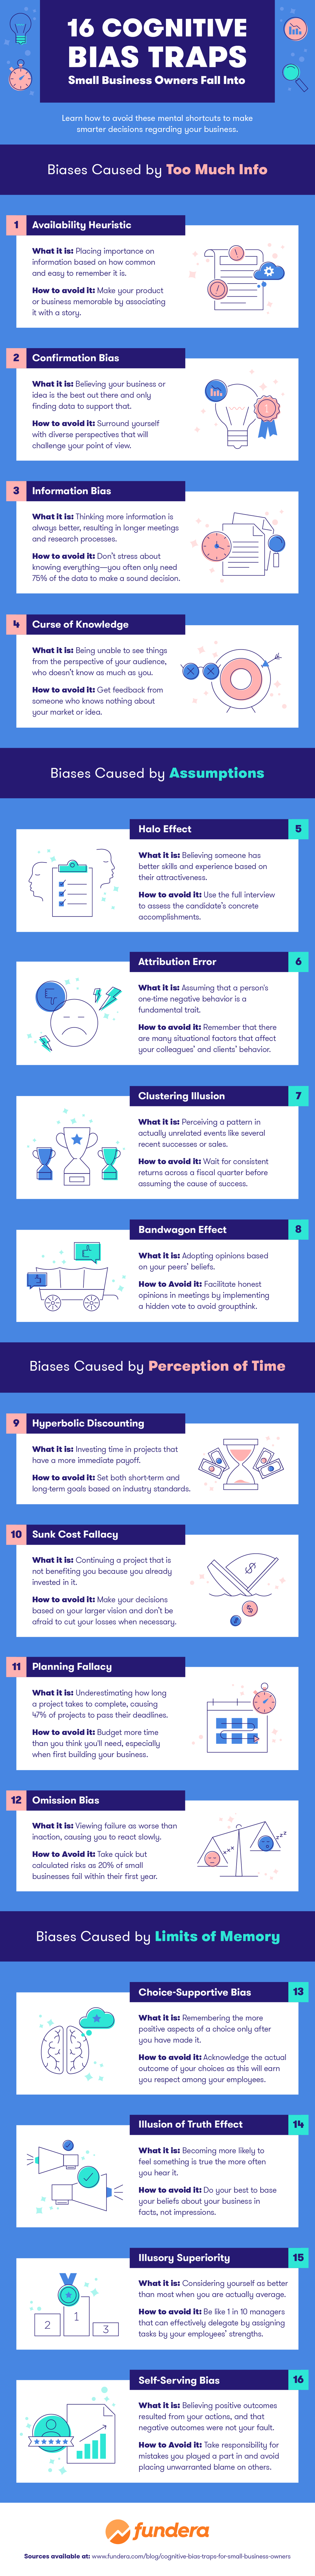 How to avoid These16 Cognitive Bias Traps 